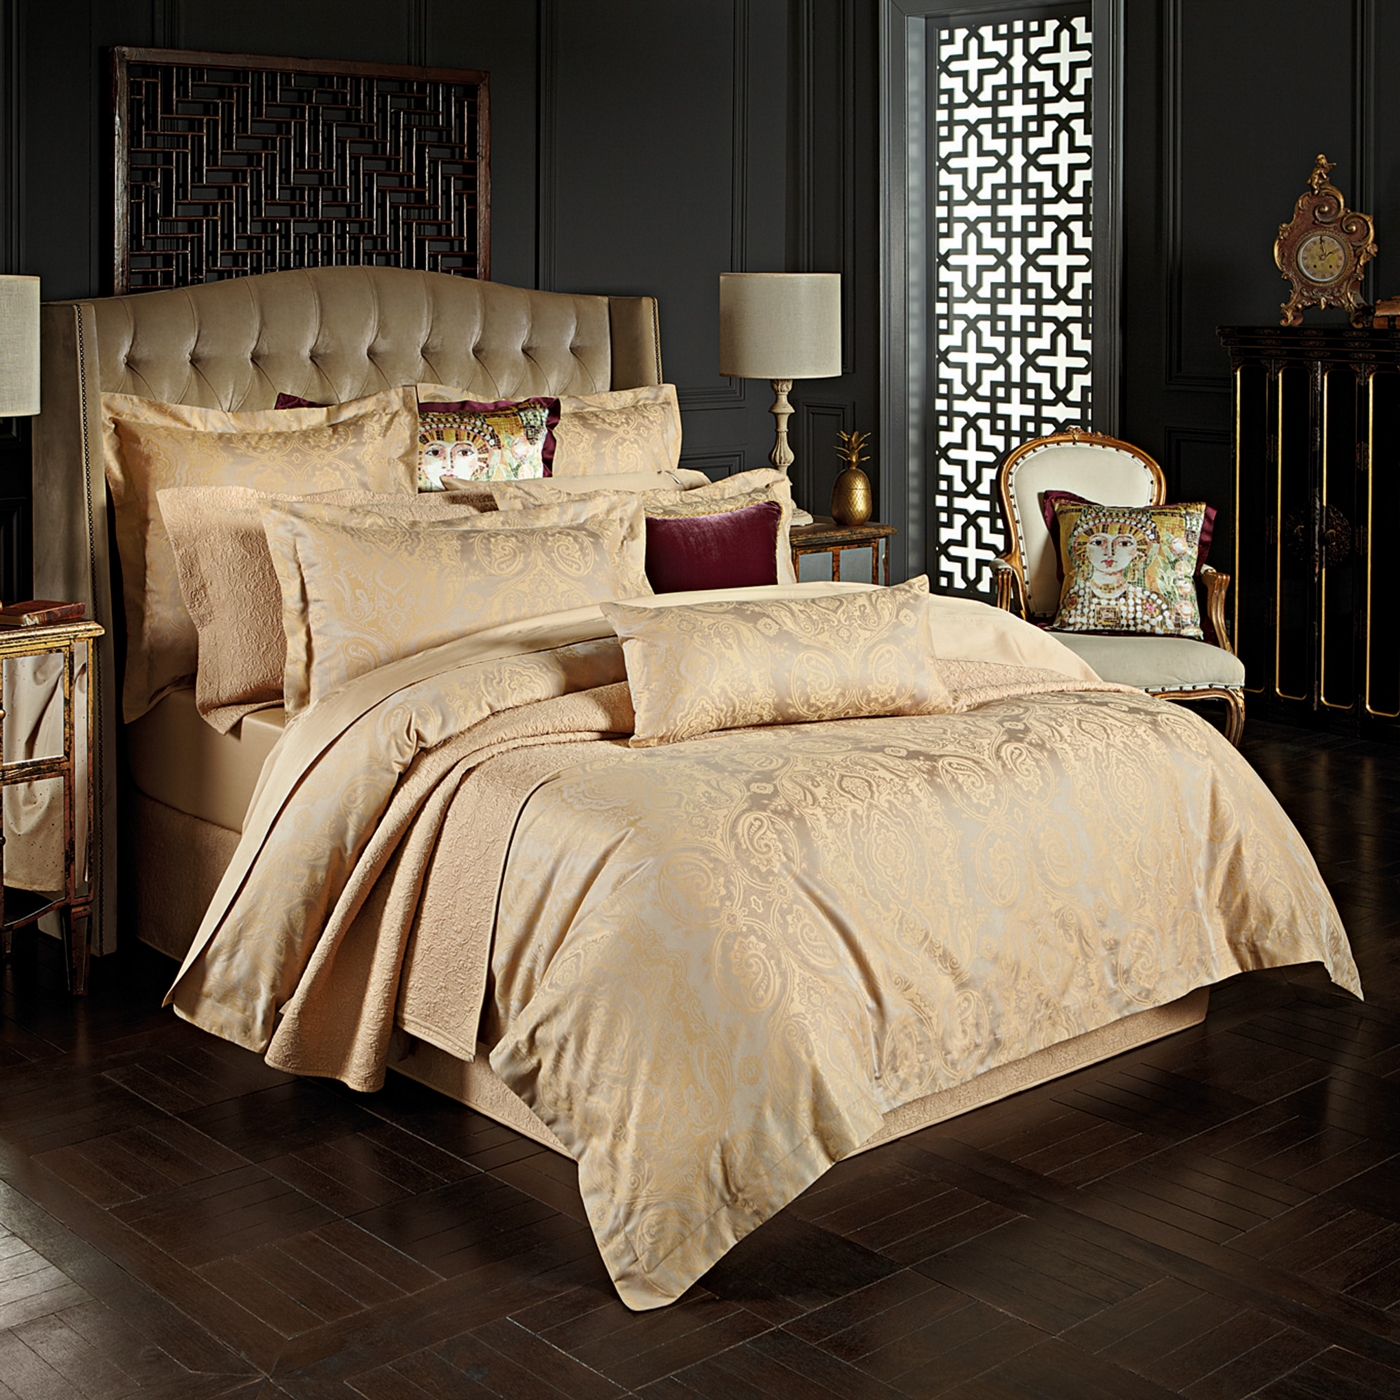 Sheridan Gold Siam bed linen